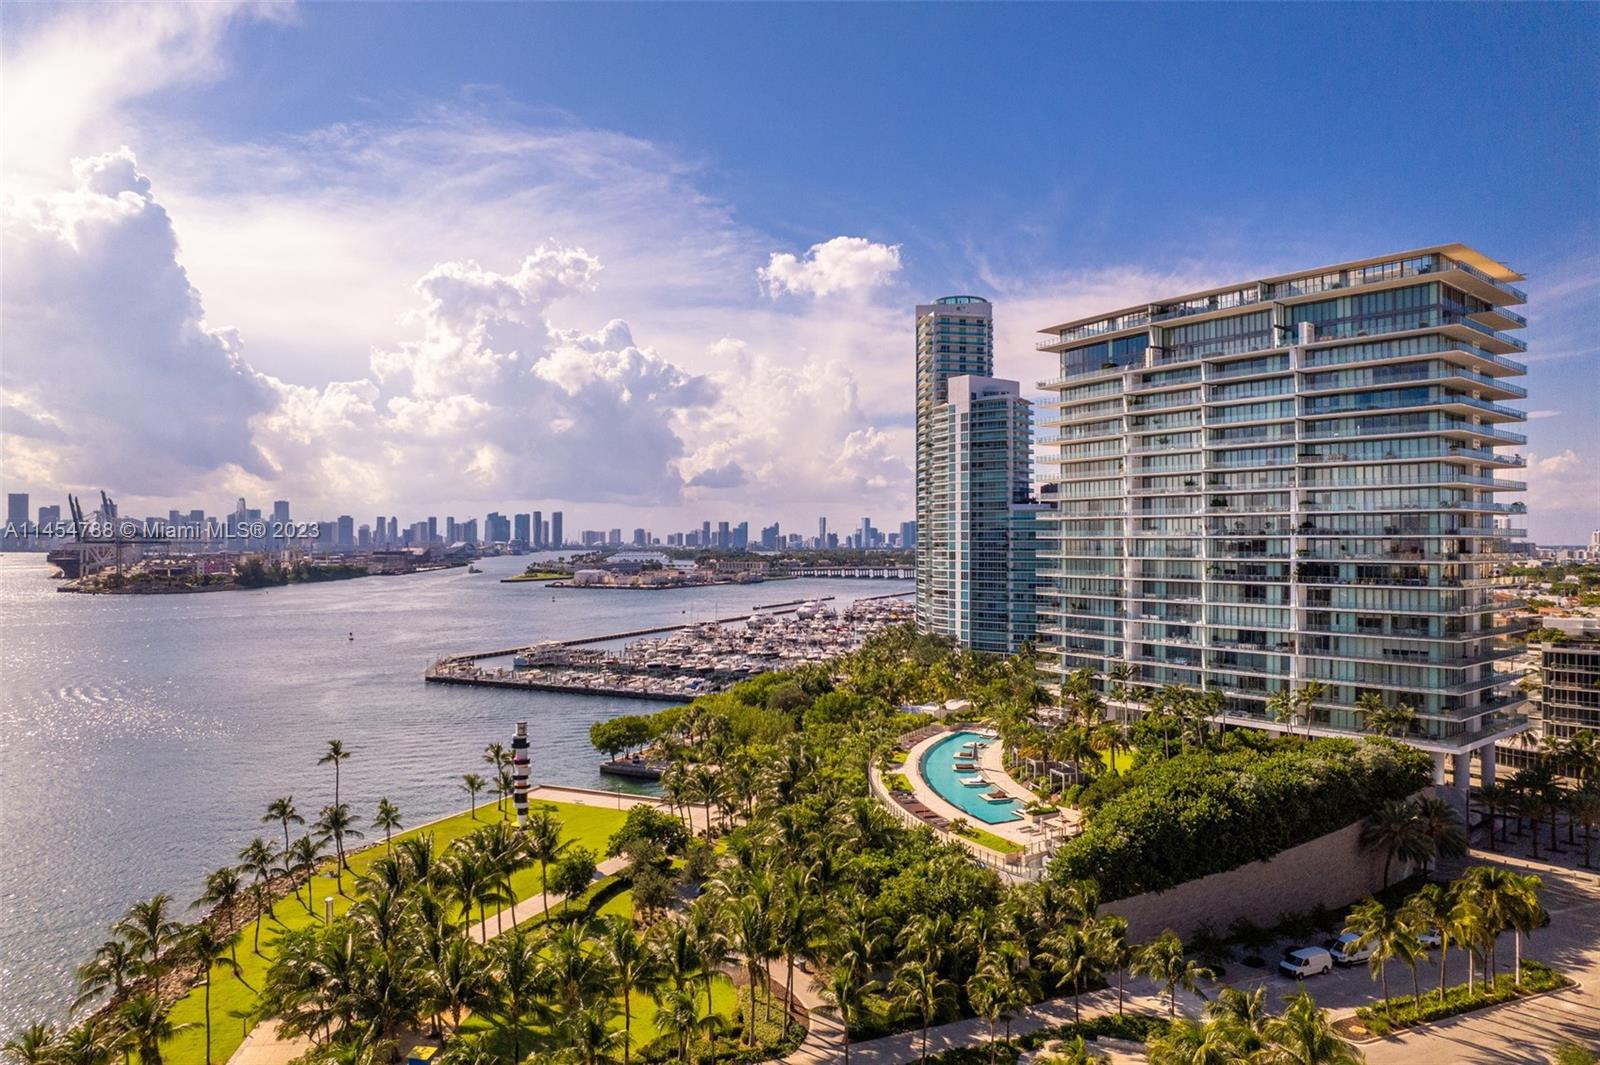 Sought after 4 bedroom at Apogee in prime South of Fifth.  Spacious,  4/3.5 bath corner residence has 4154 sf of indoor living area. Exceptional sunrise and sunset views of Fisher Island, cruise ship alley, and the Ocean are best enjoyed from your 2400 square foot wrap-around terrace with summer kitchen.  Private 2.5 car air-conditioned garage.